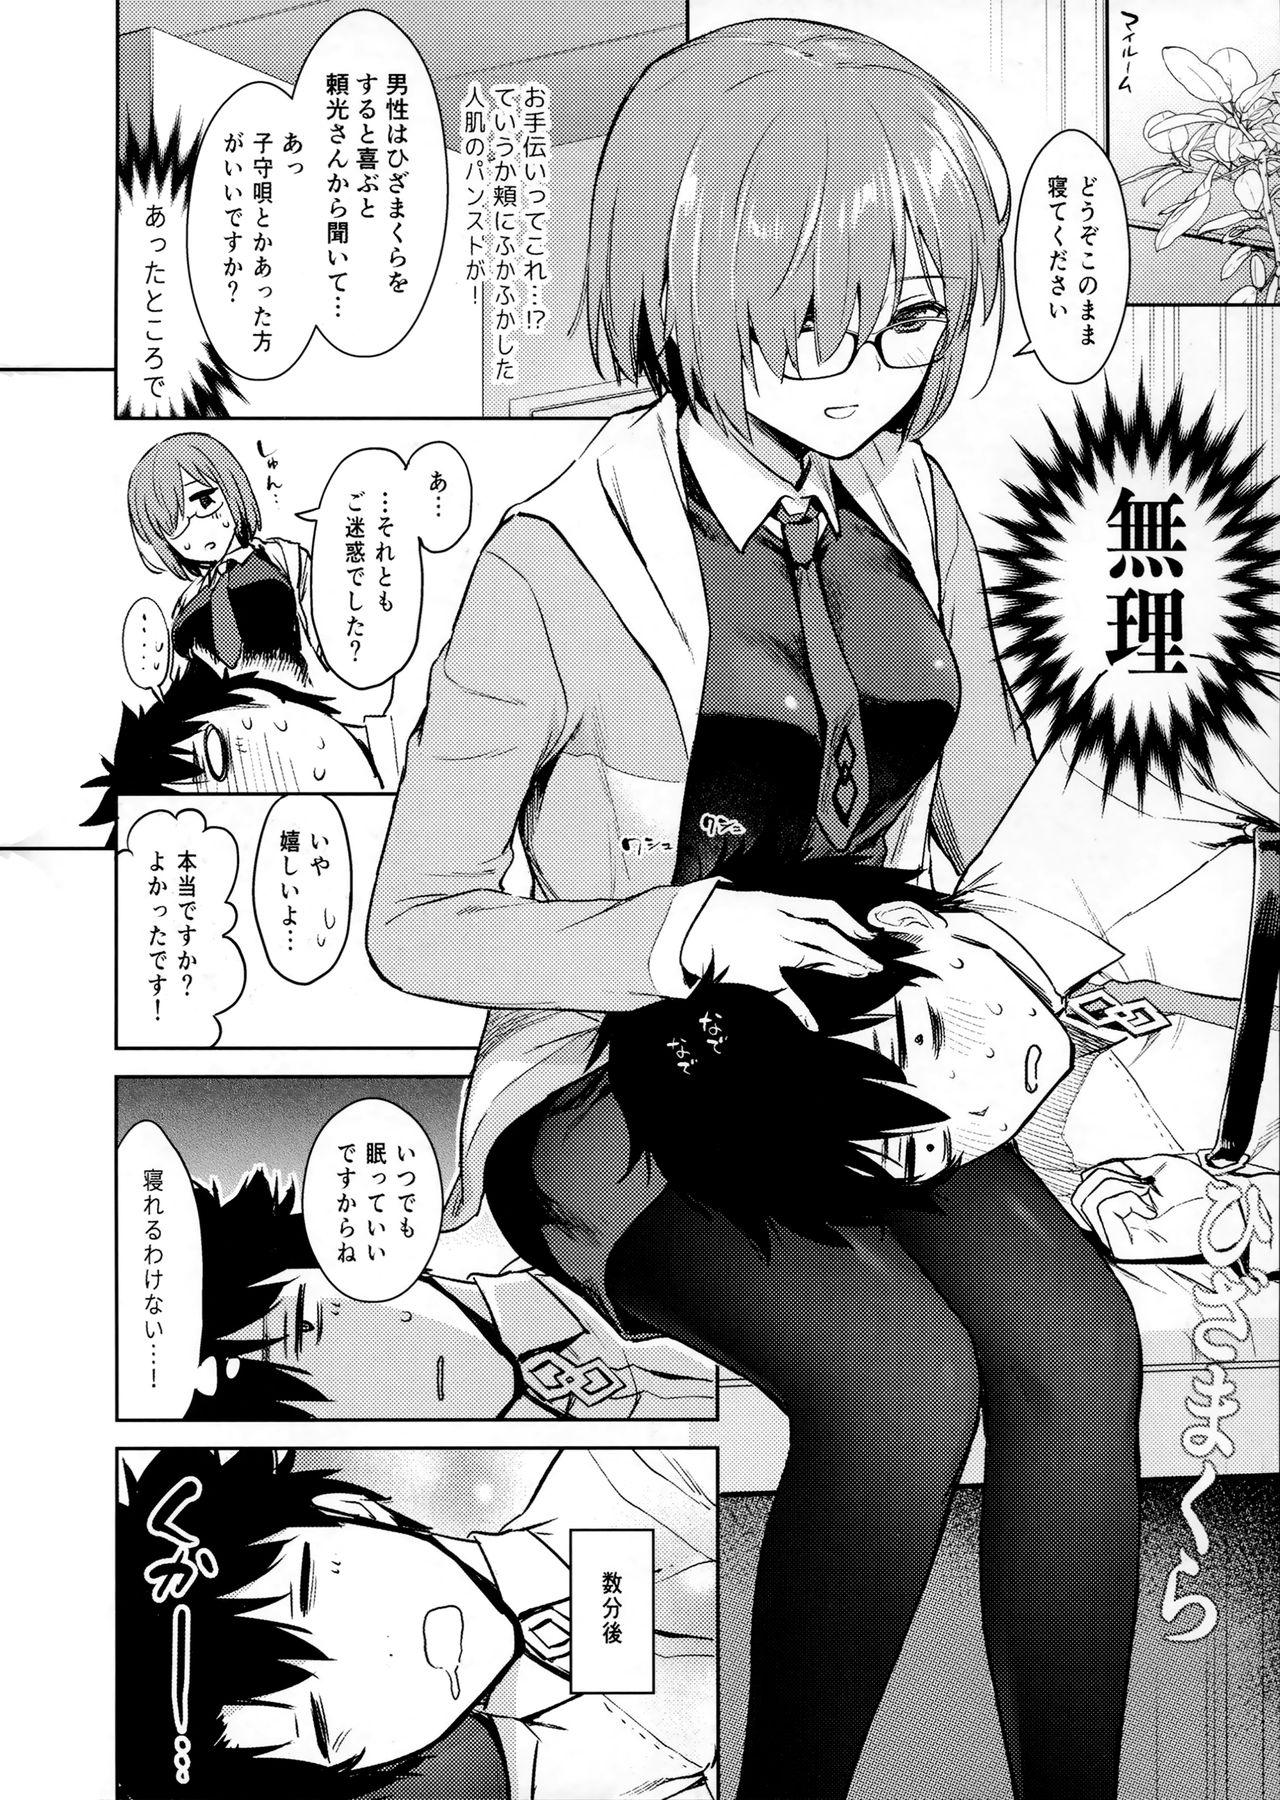 Culo MASH, HORNY, MASH - Fate grand order Swallow - Page 3